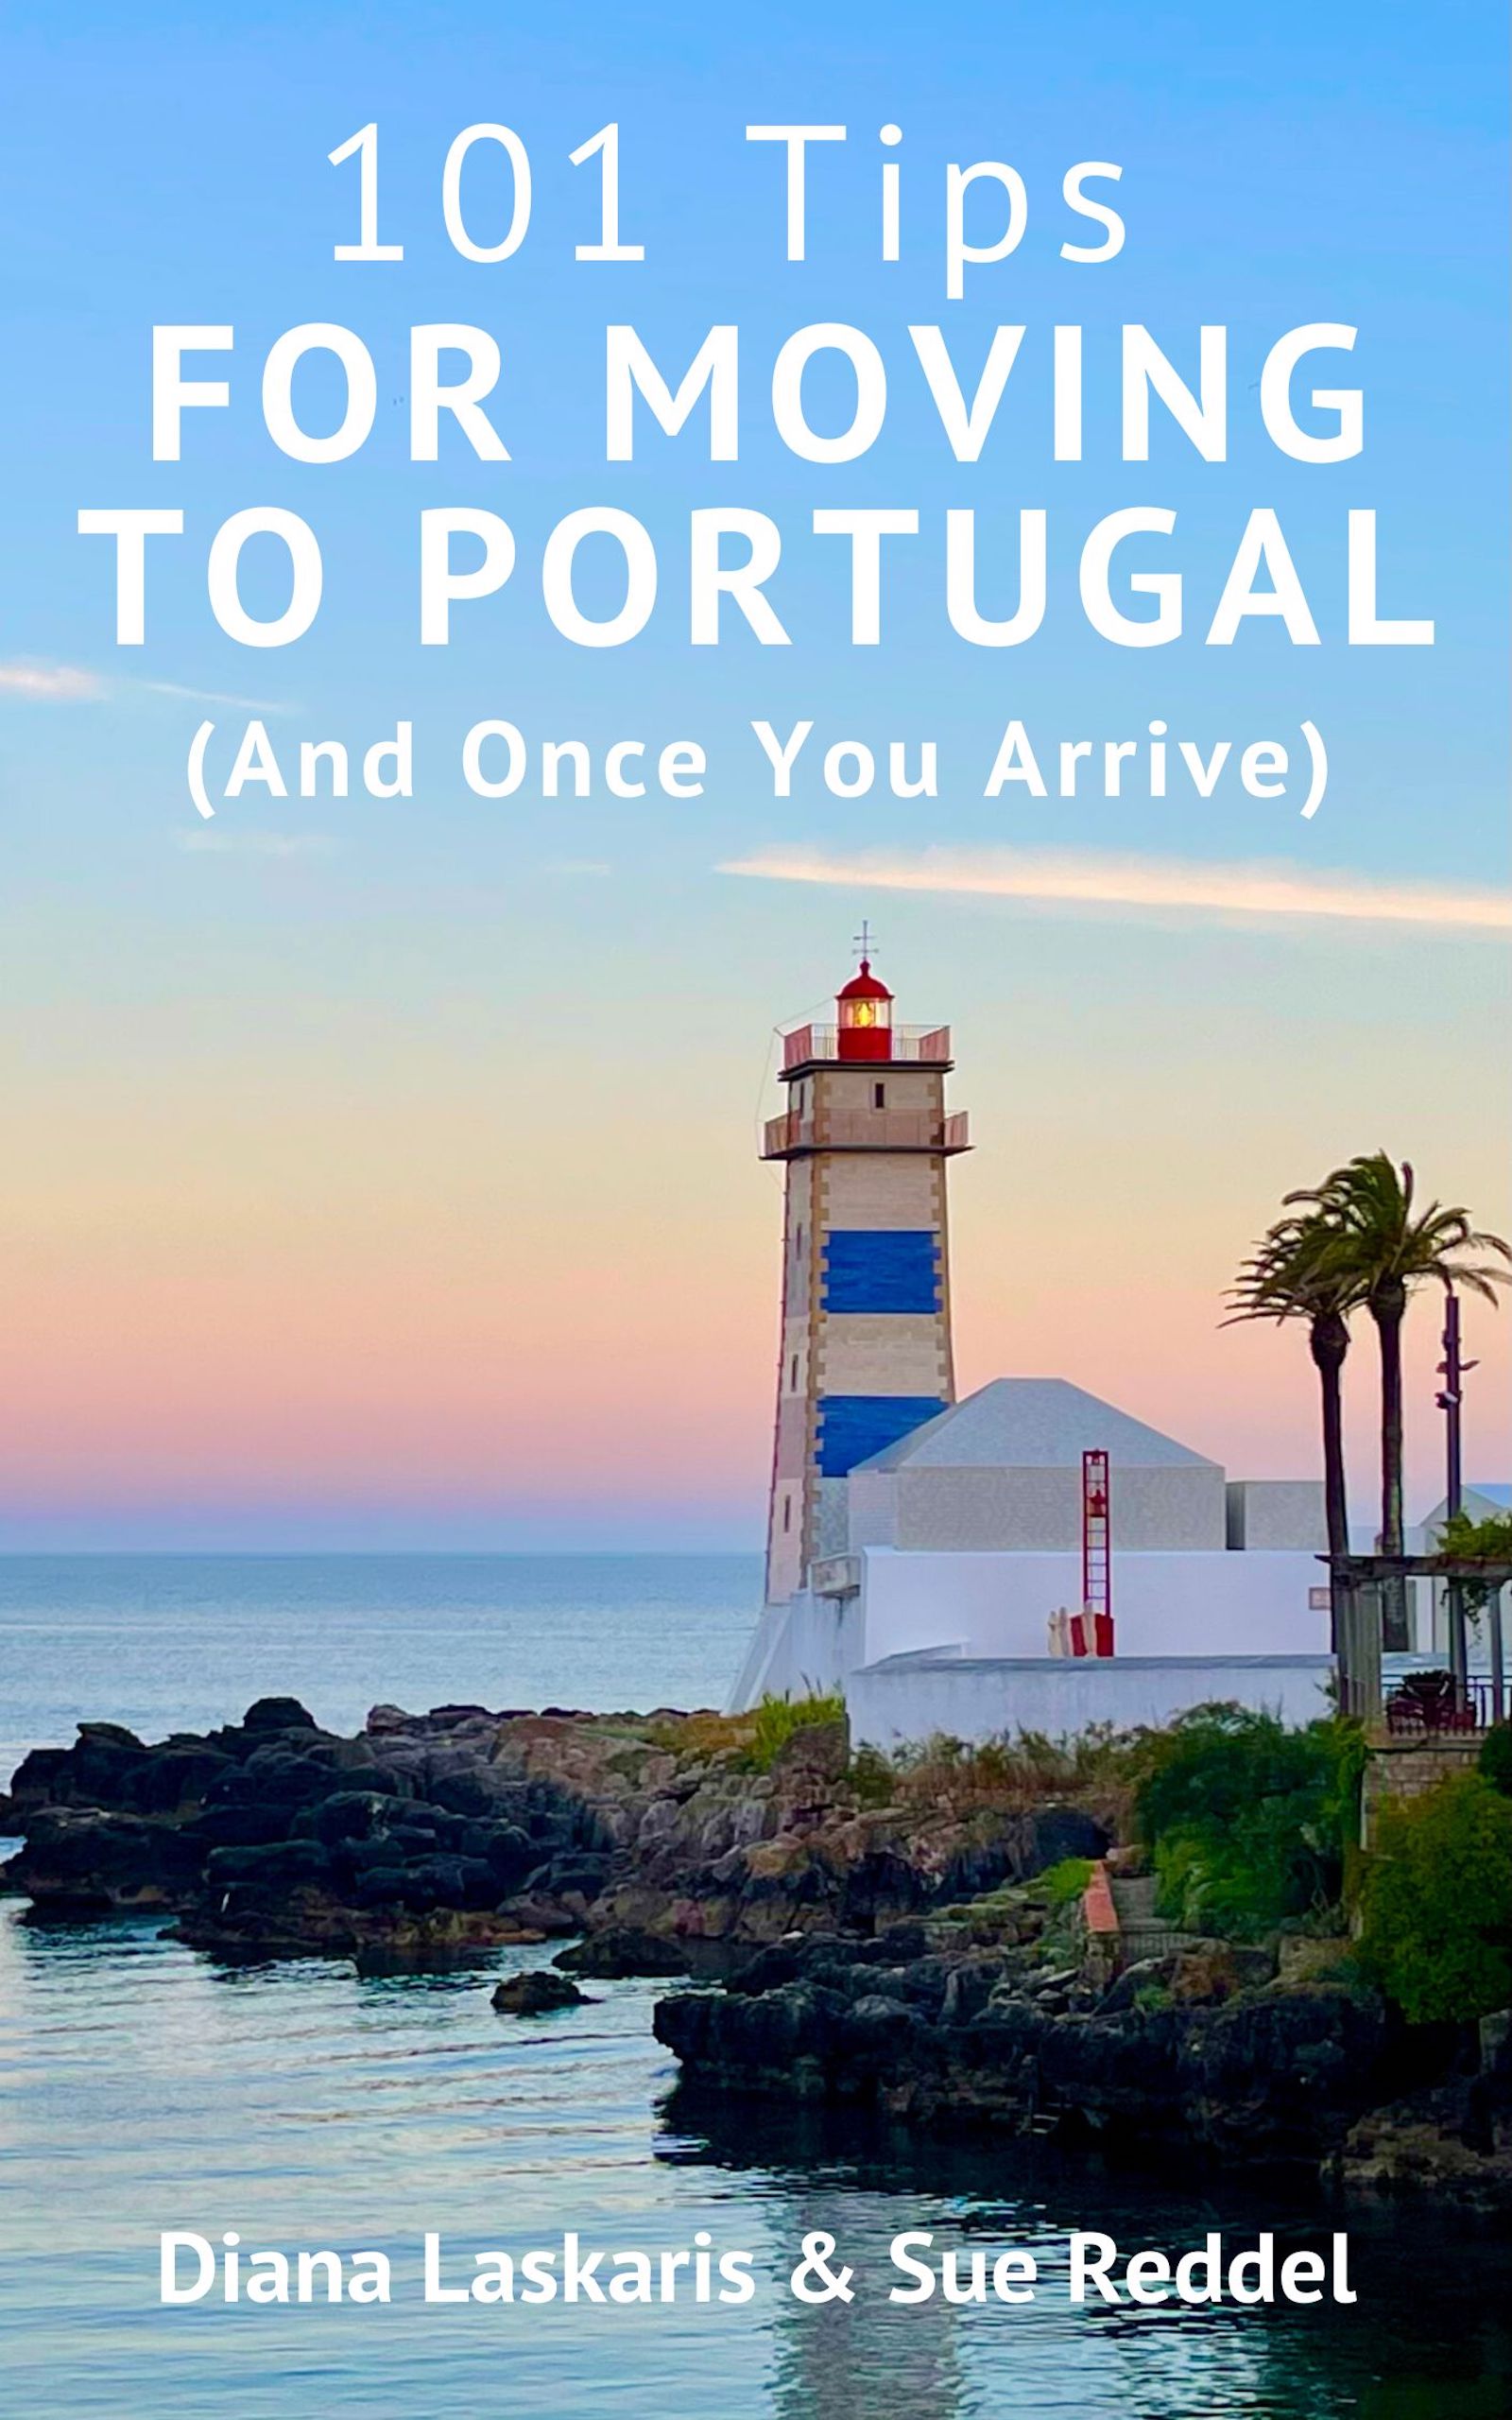 101 Tips For Moving To Portugal ebook